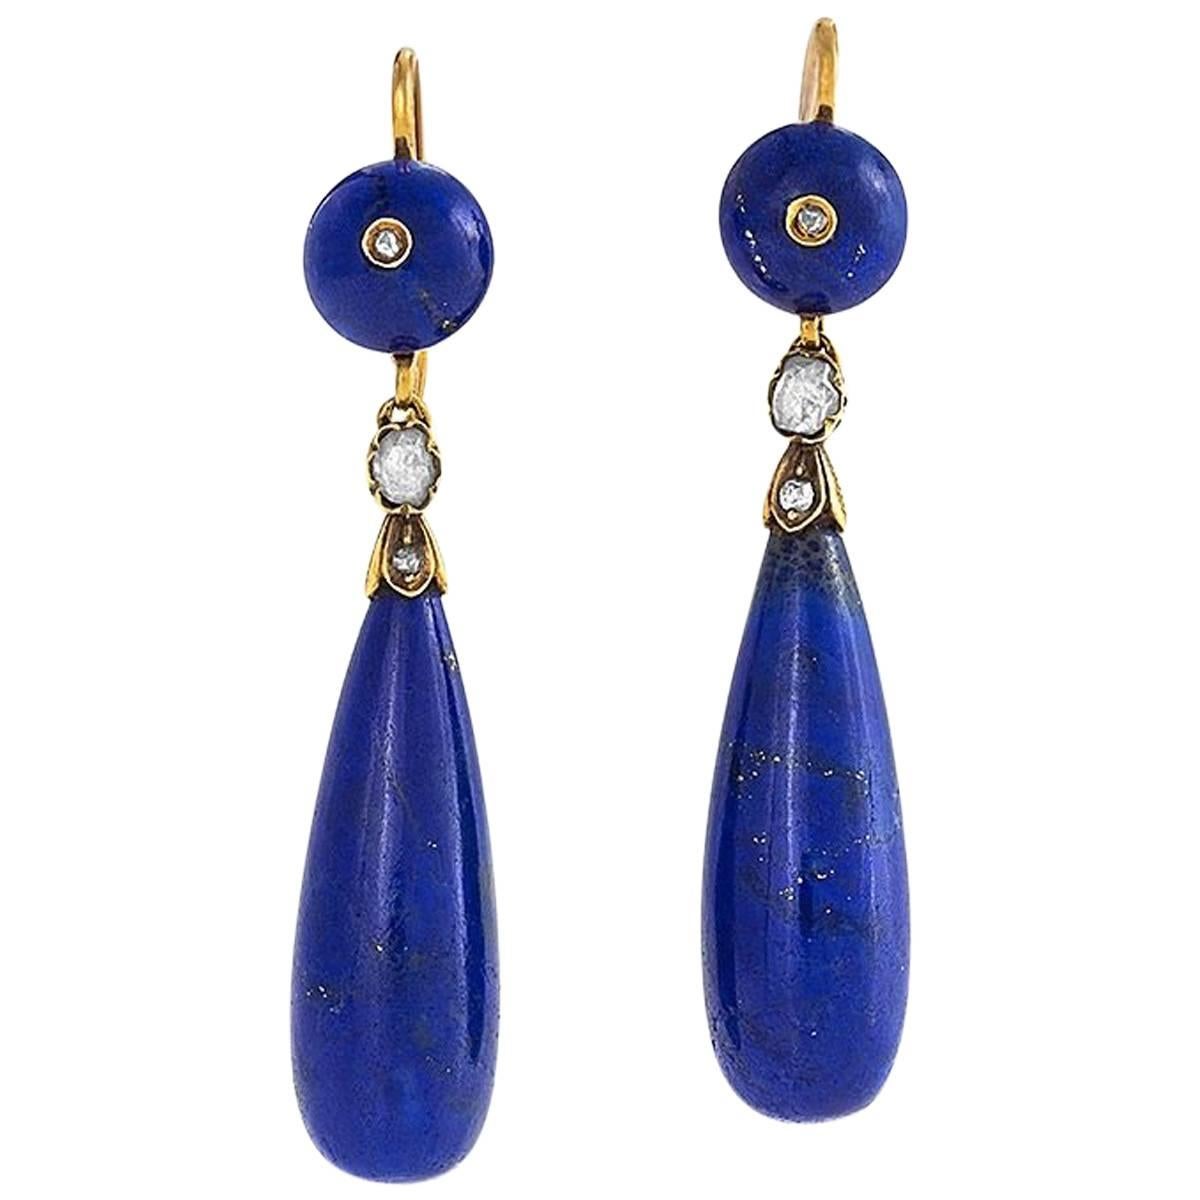 French Antique Diamond Lapis Lazuli and Gold Pendant Earrings